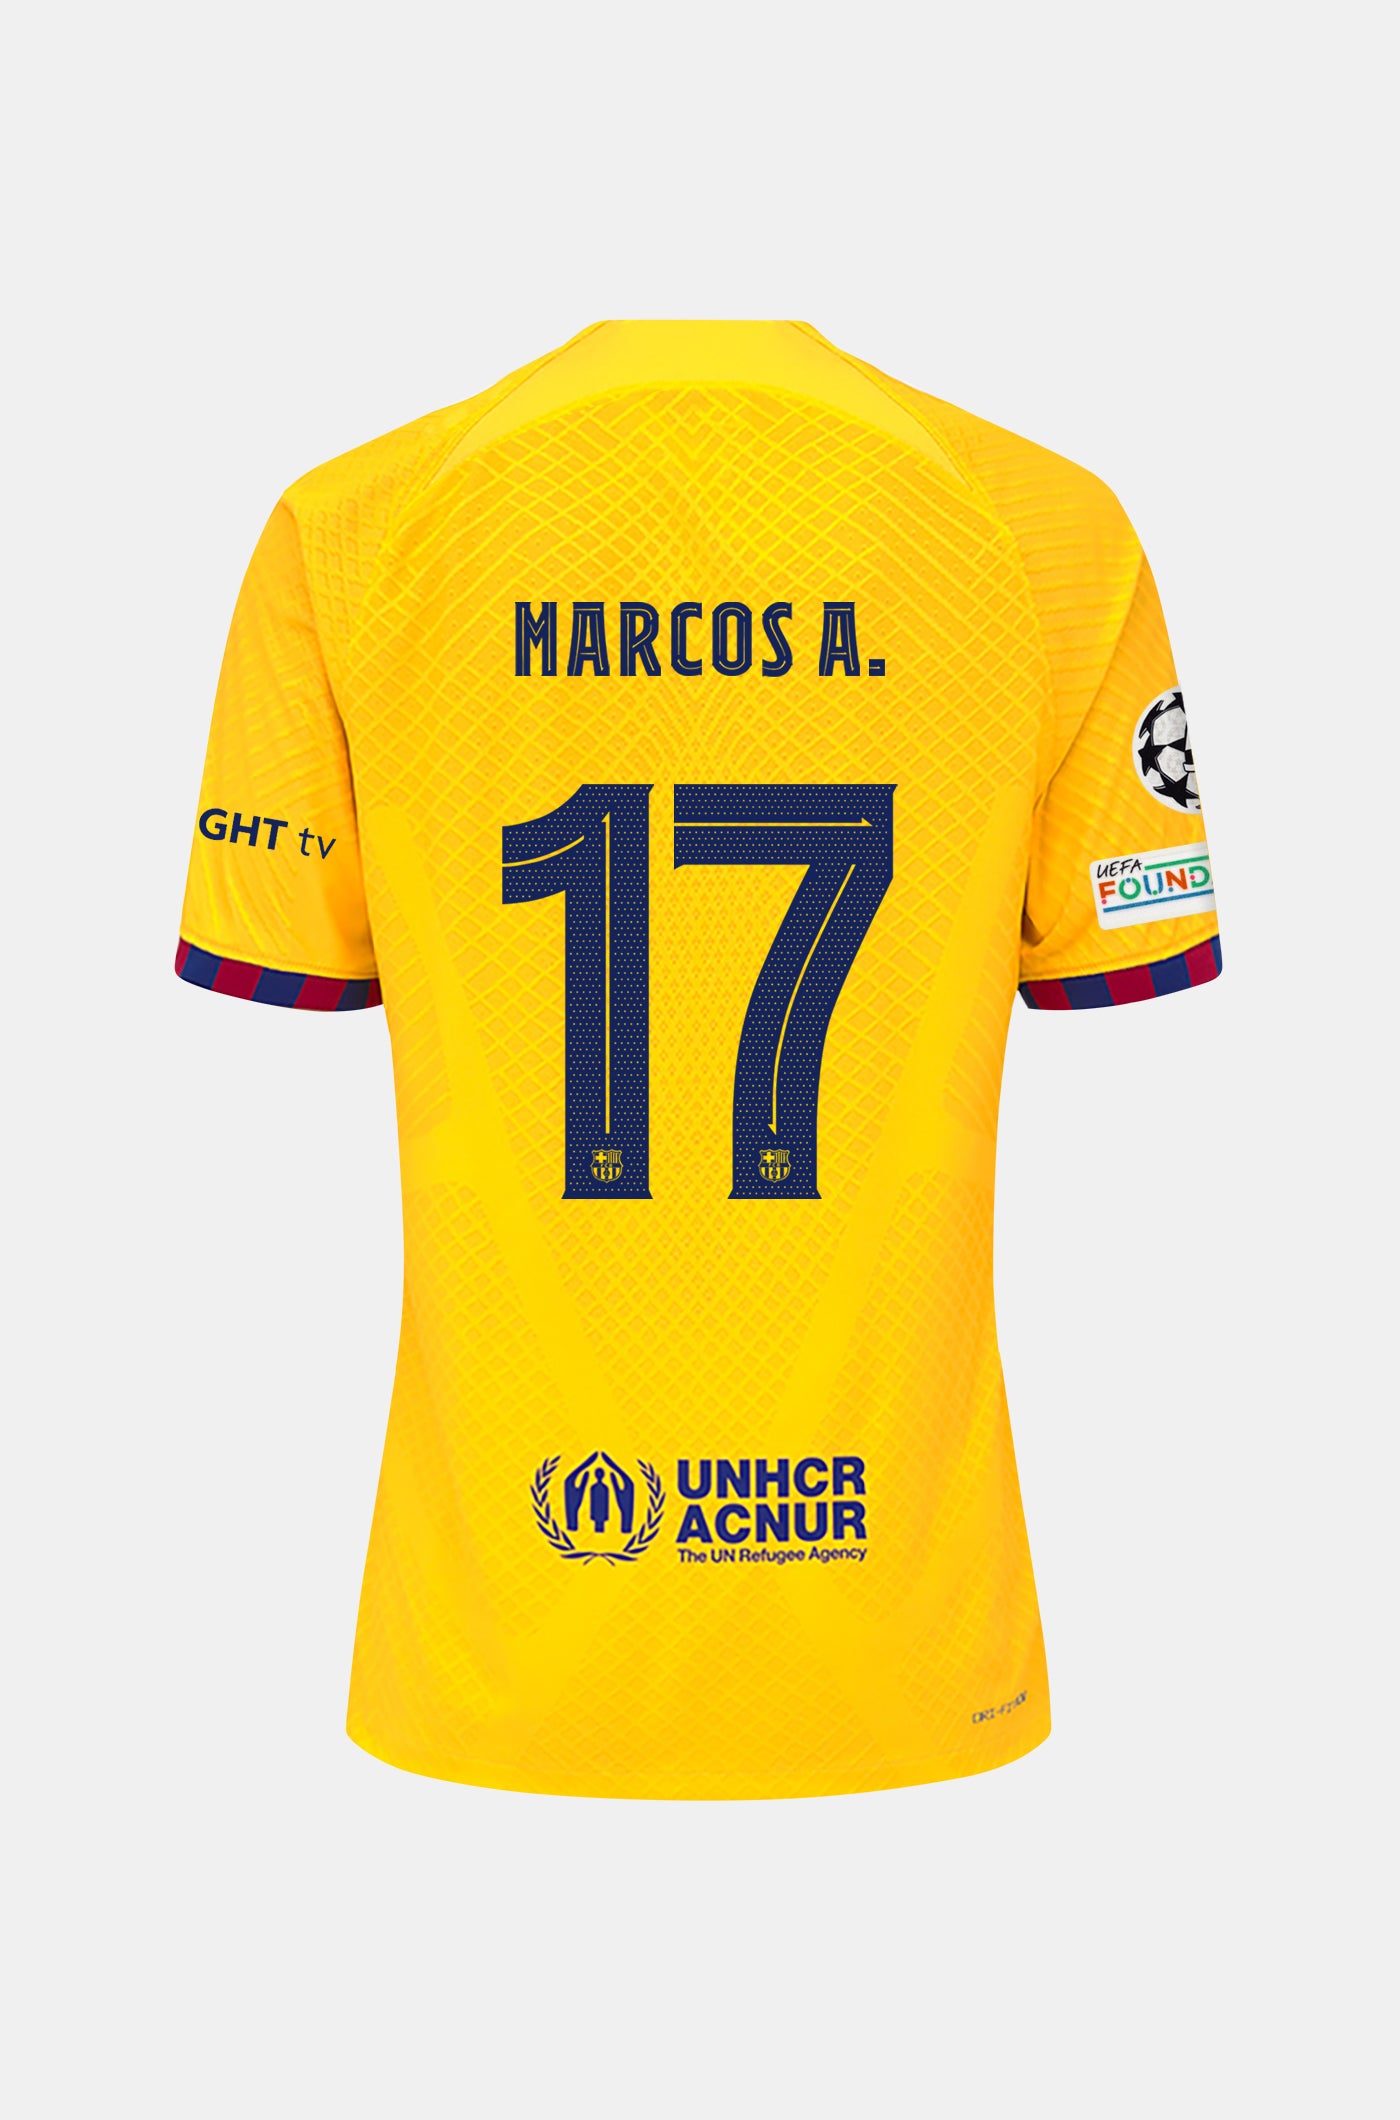 UCL FC Barcelona fourth shirt 23/24 Player’s Edition - MARCOS A.